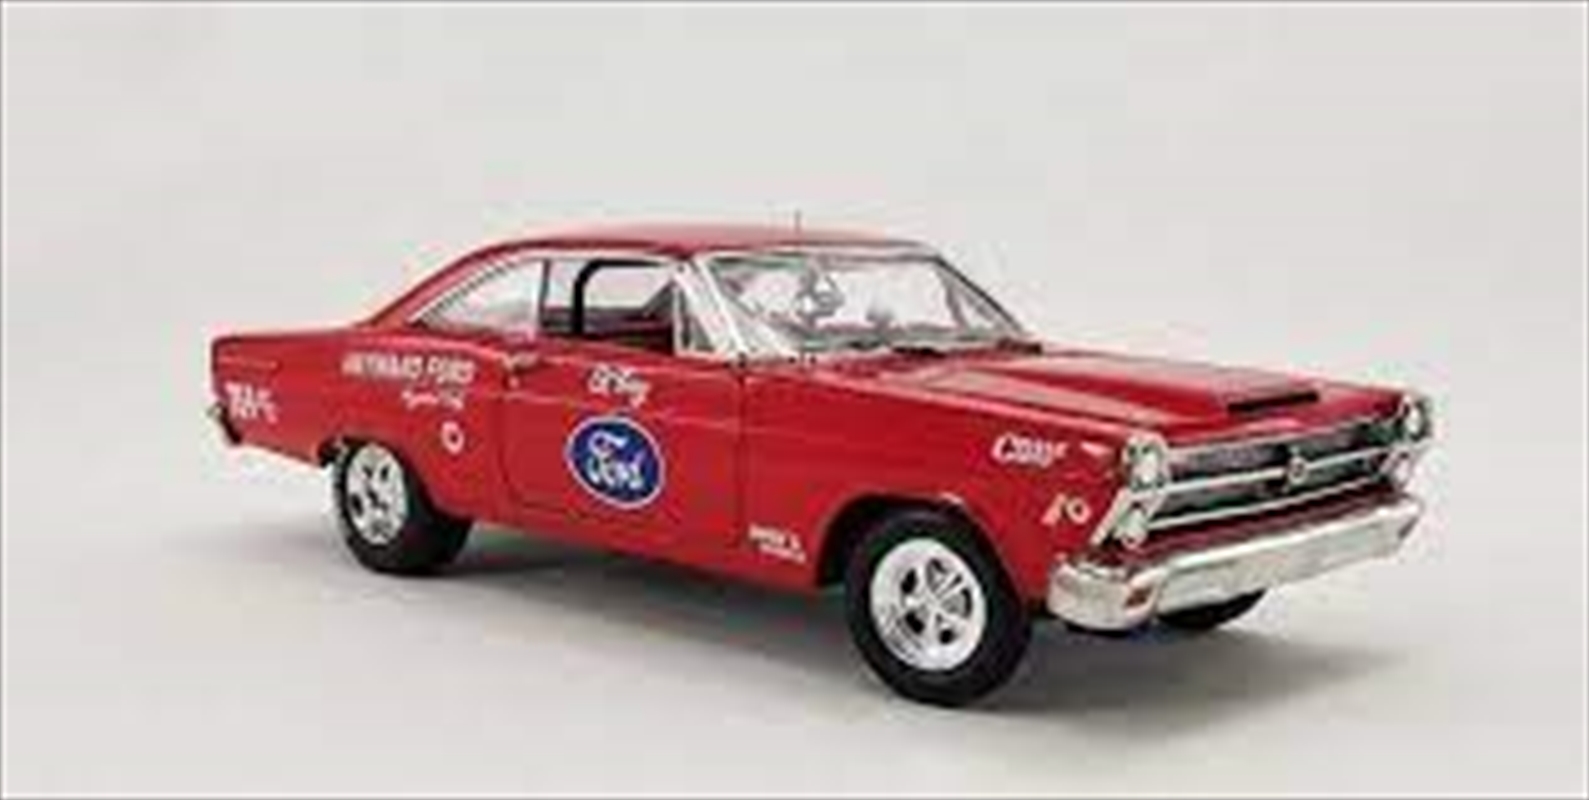 1:18 1966 Ford Fairlane 427 Prototype - Hayward Ford - Raced by Ed Terry/Product Detail/Figurines